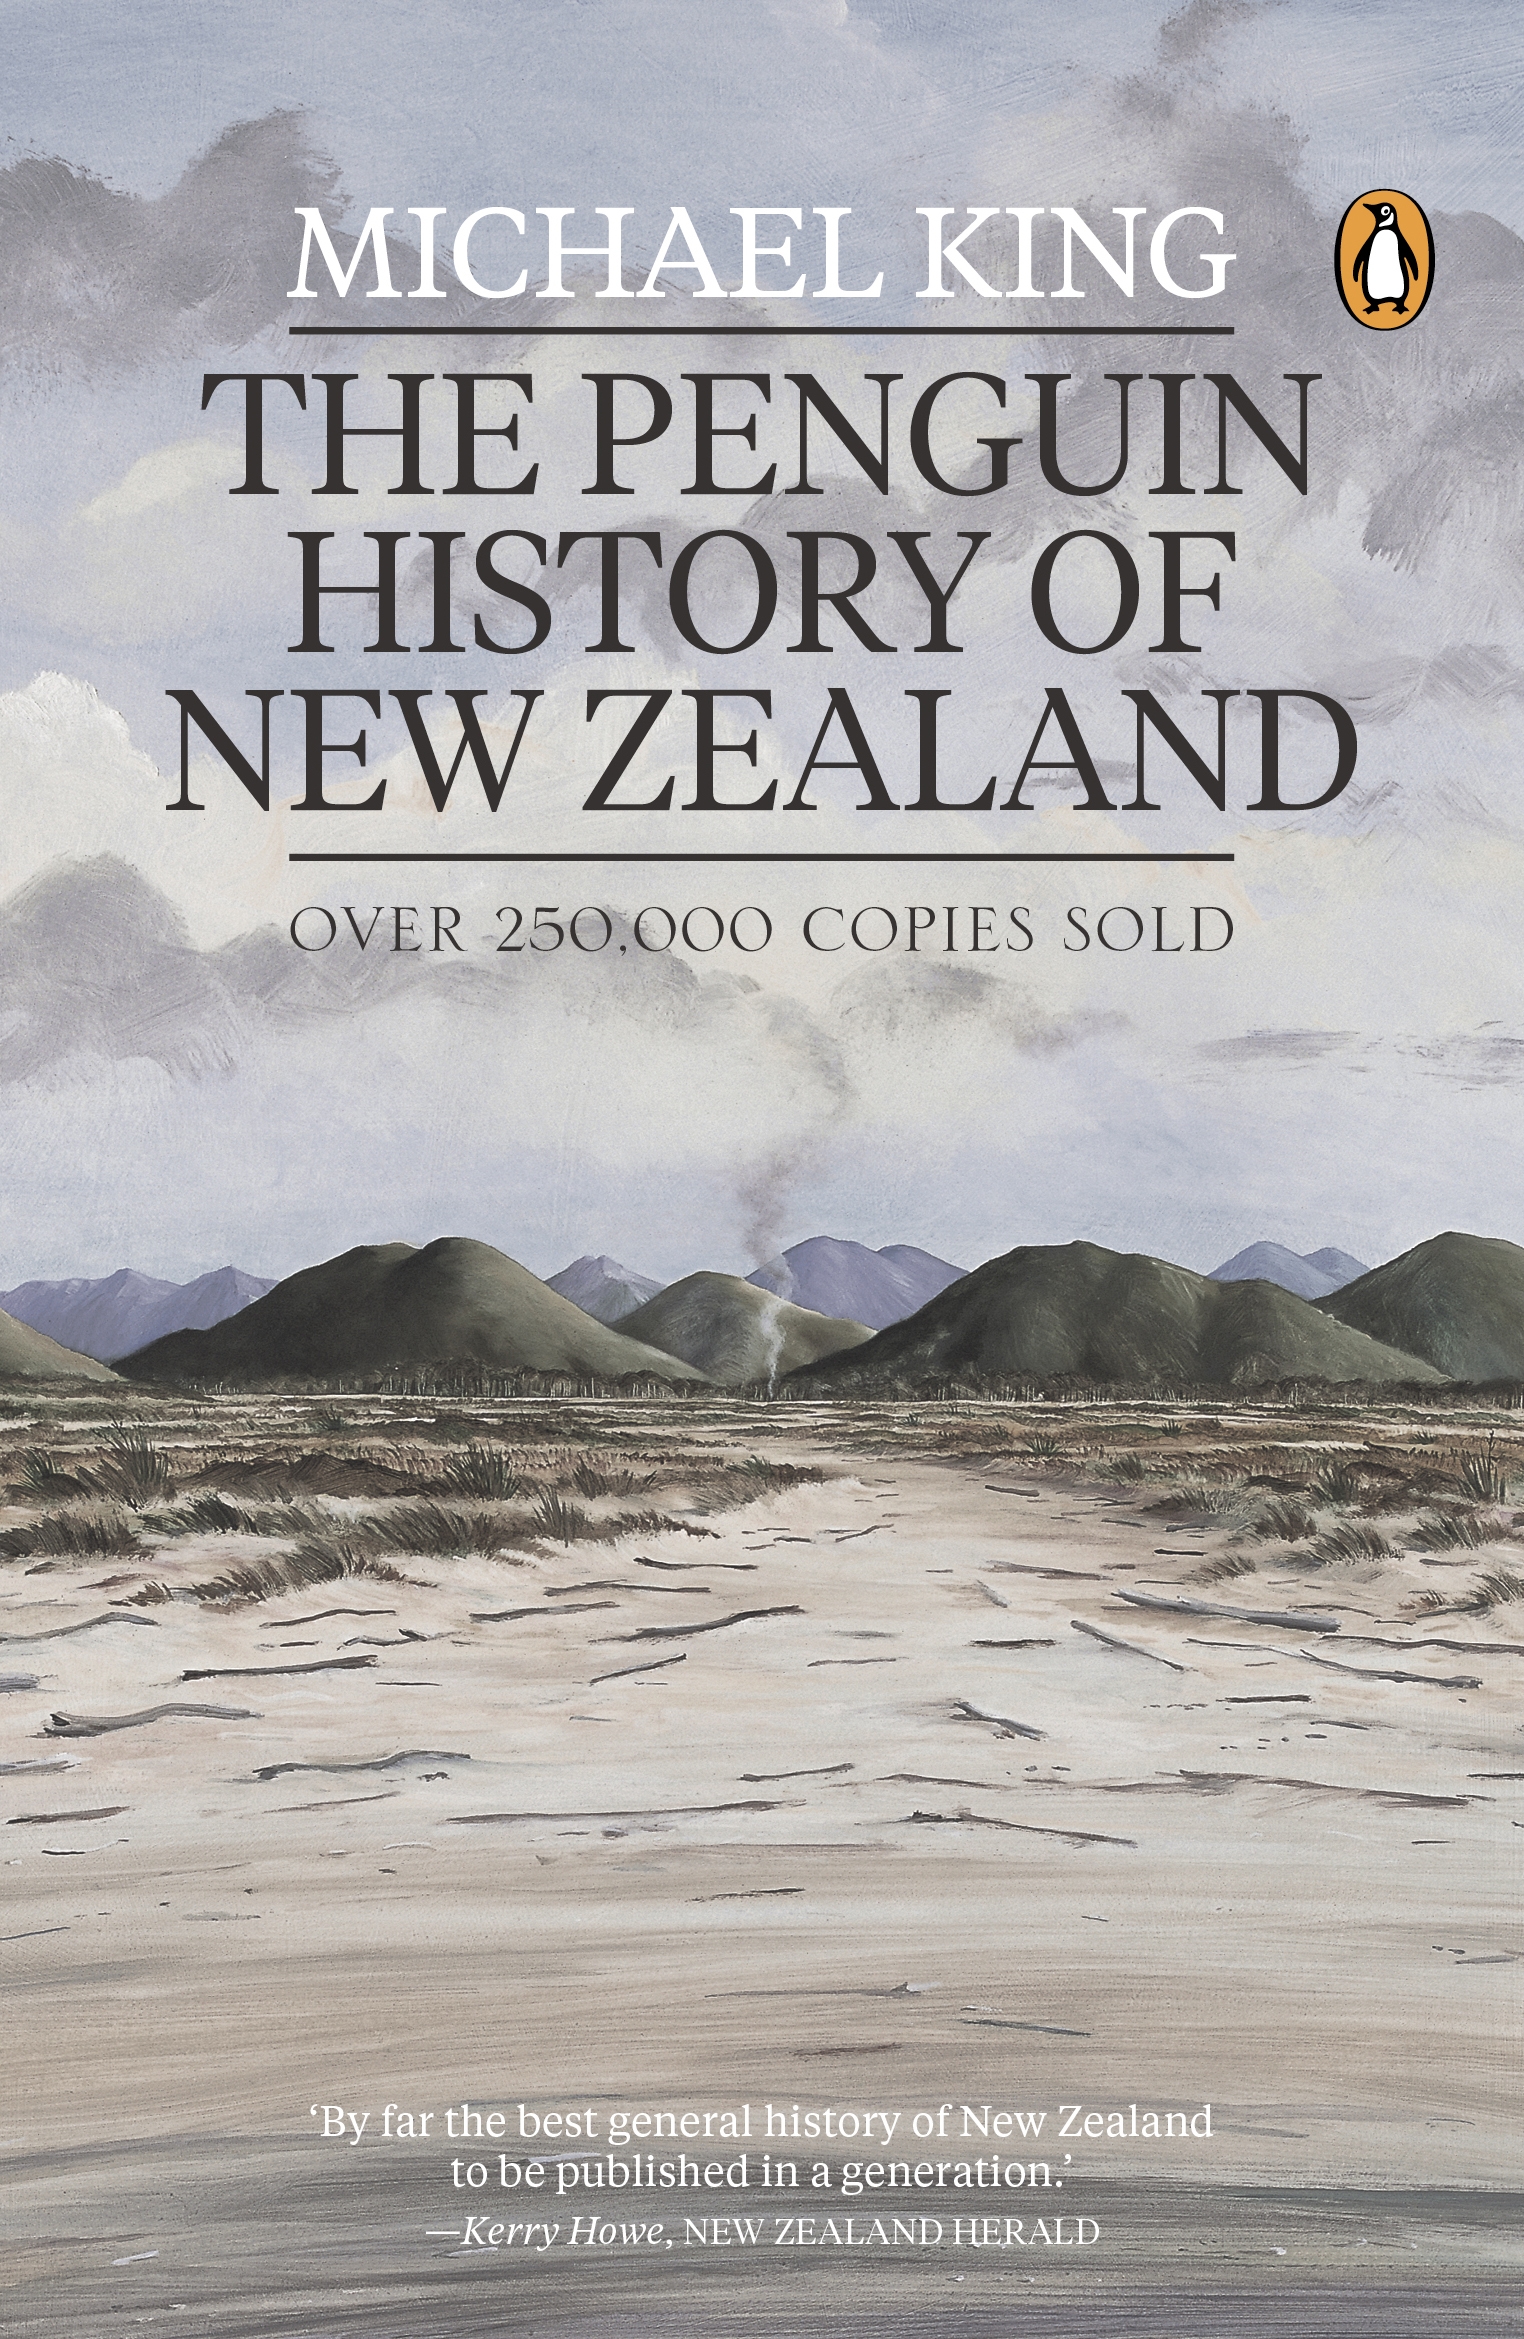 books by new zealand authors